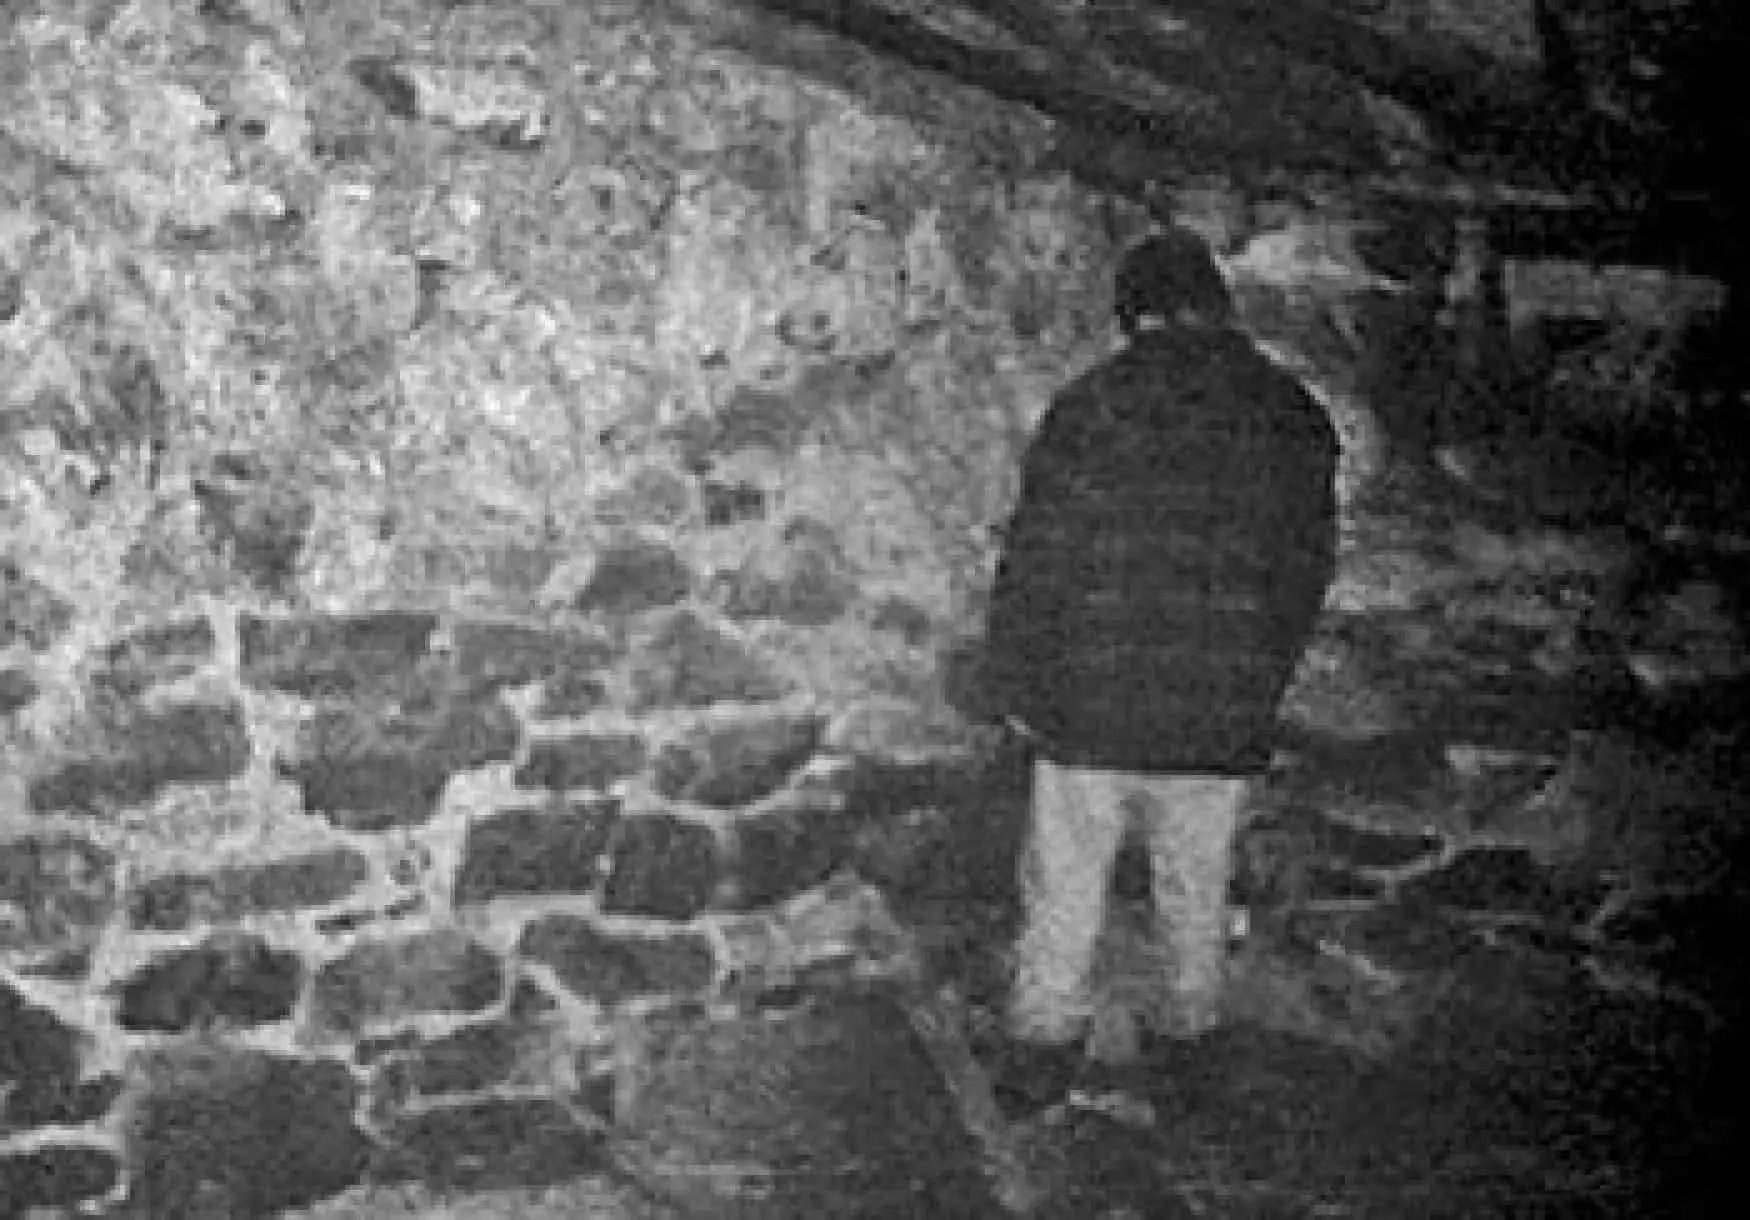 The Blair Witch Project (1999) screenshot